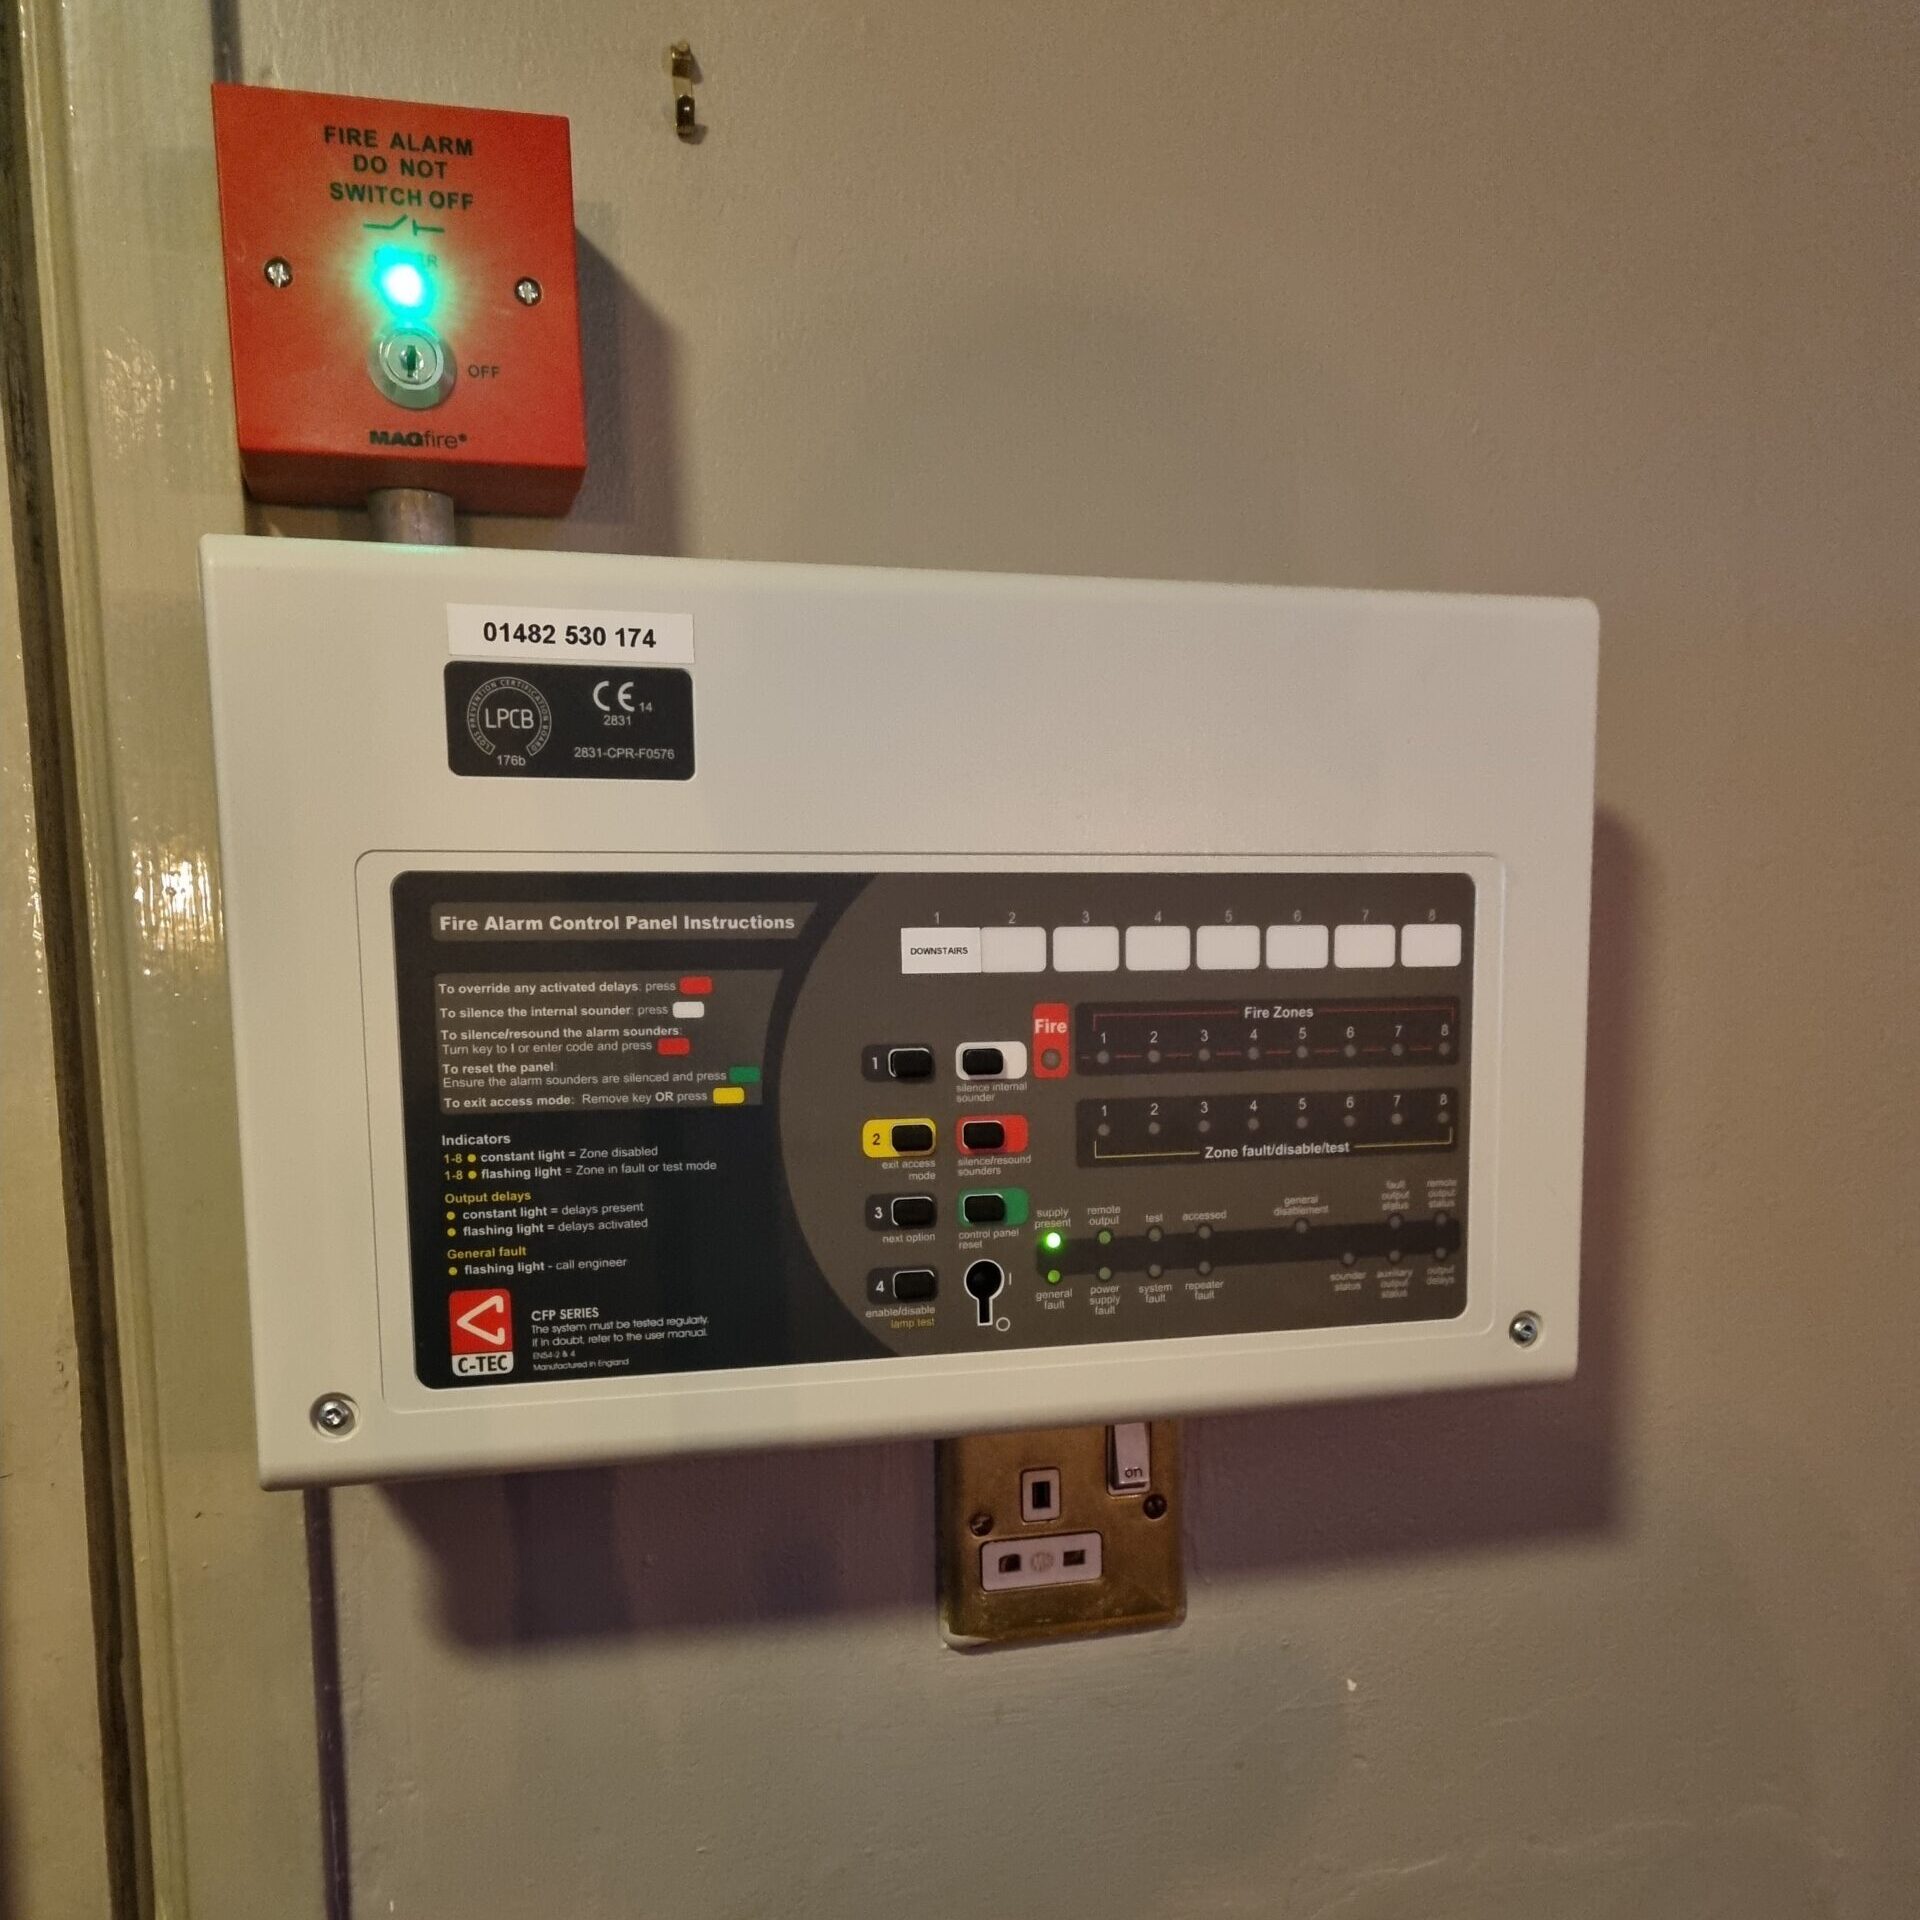 A fire alarm control panel mounted on a wall